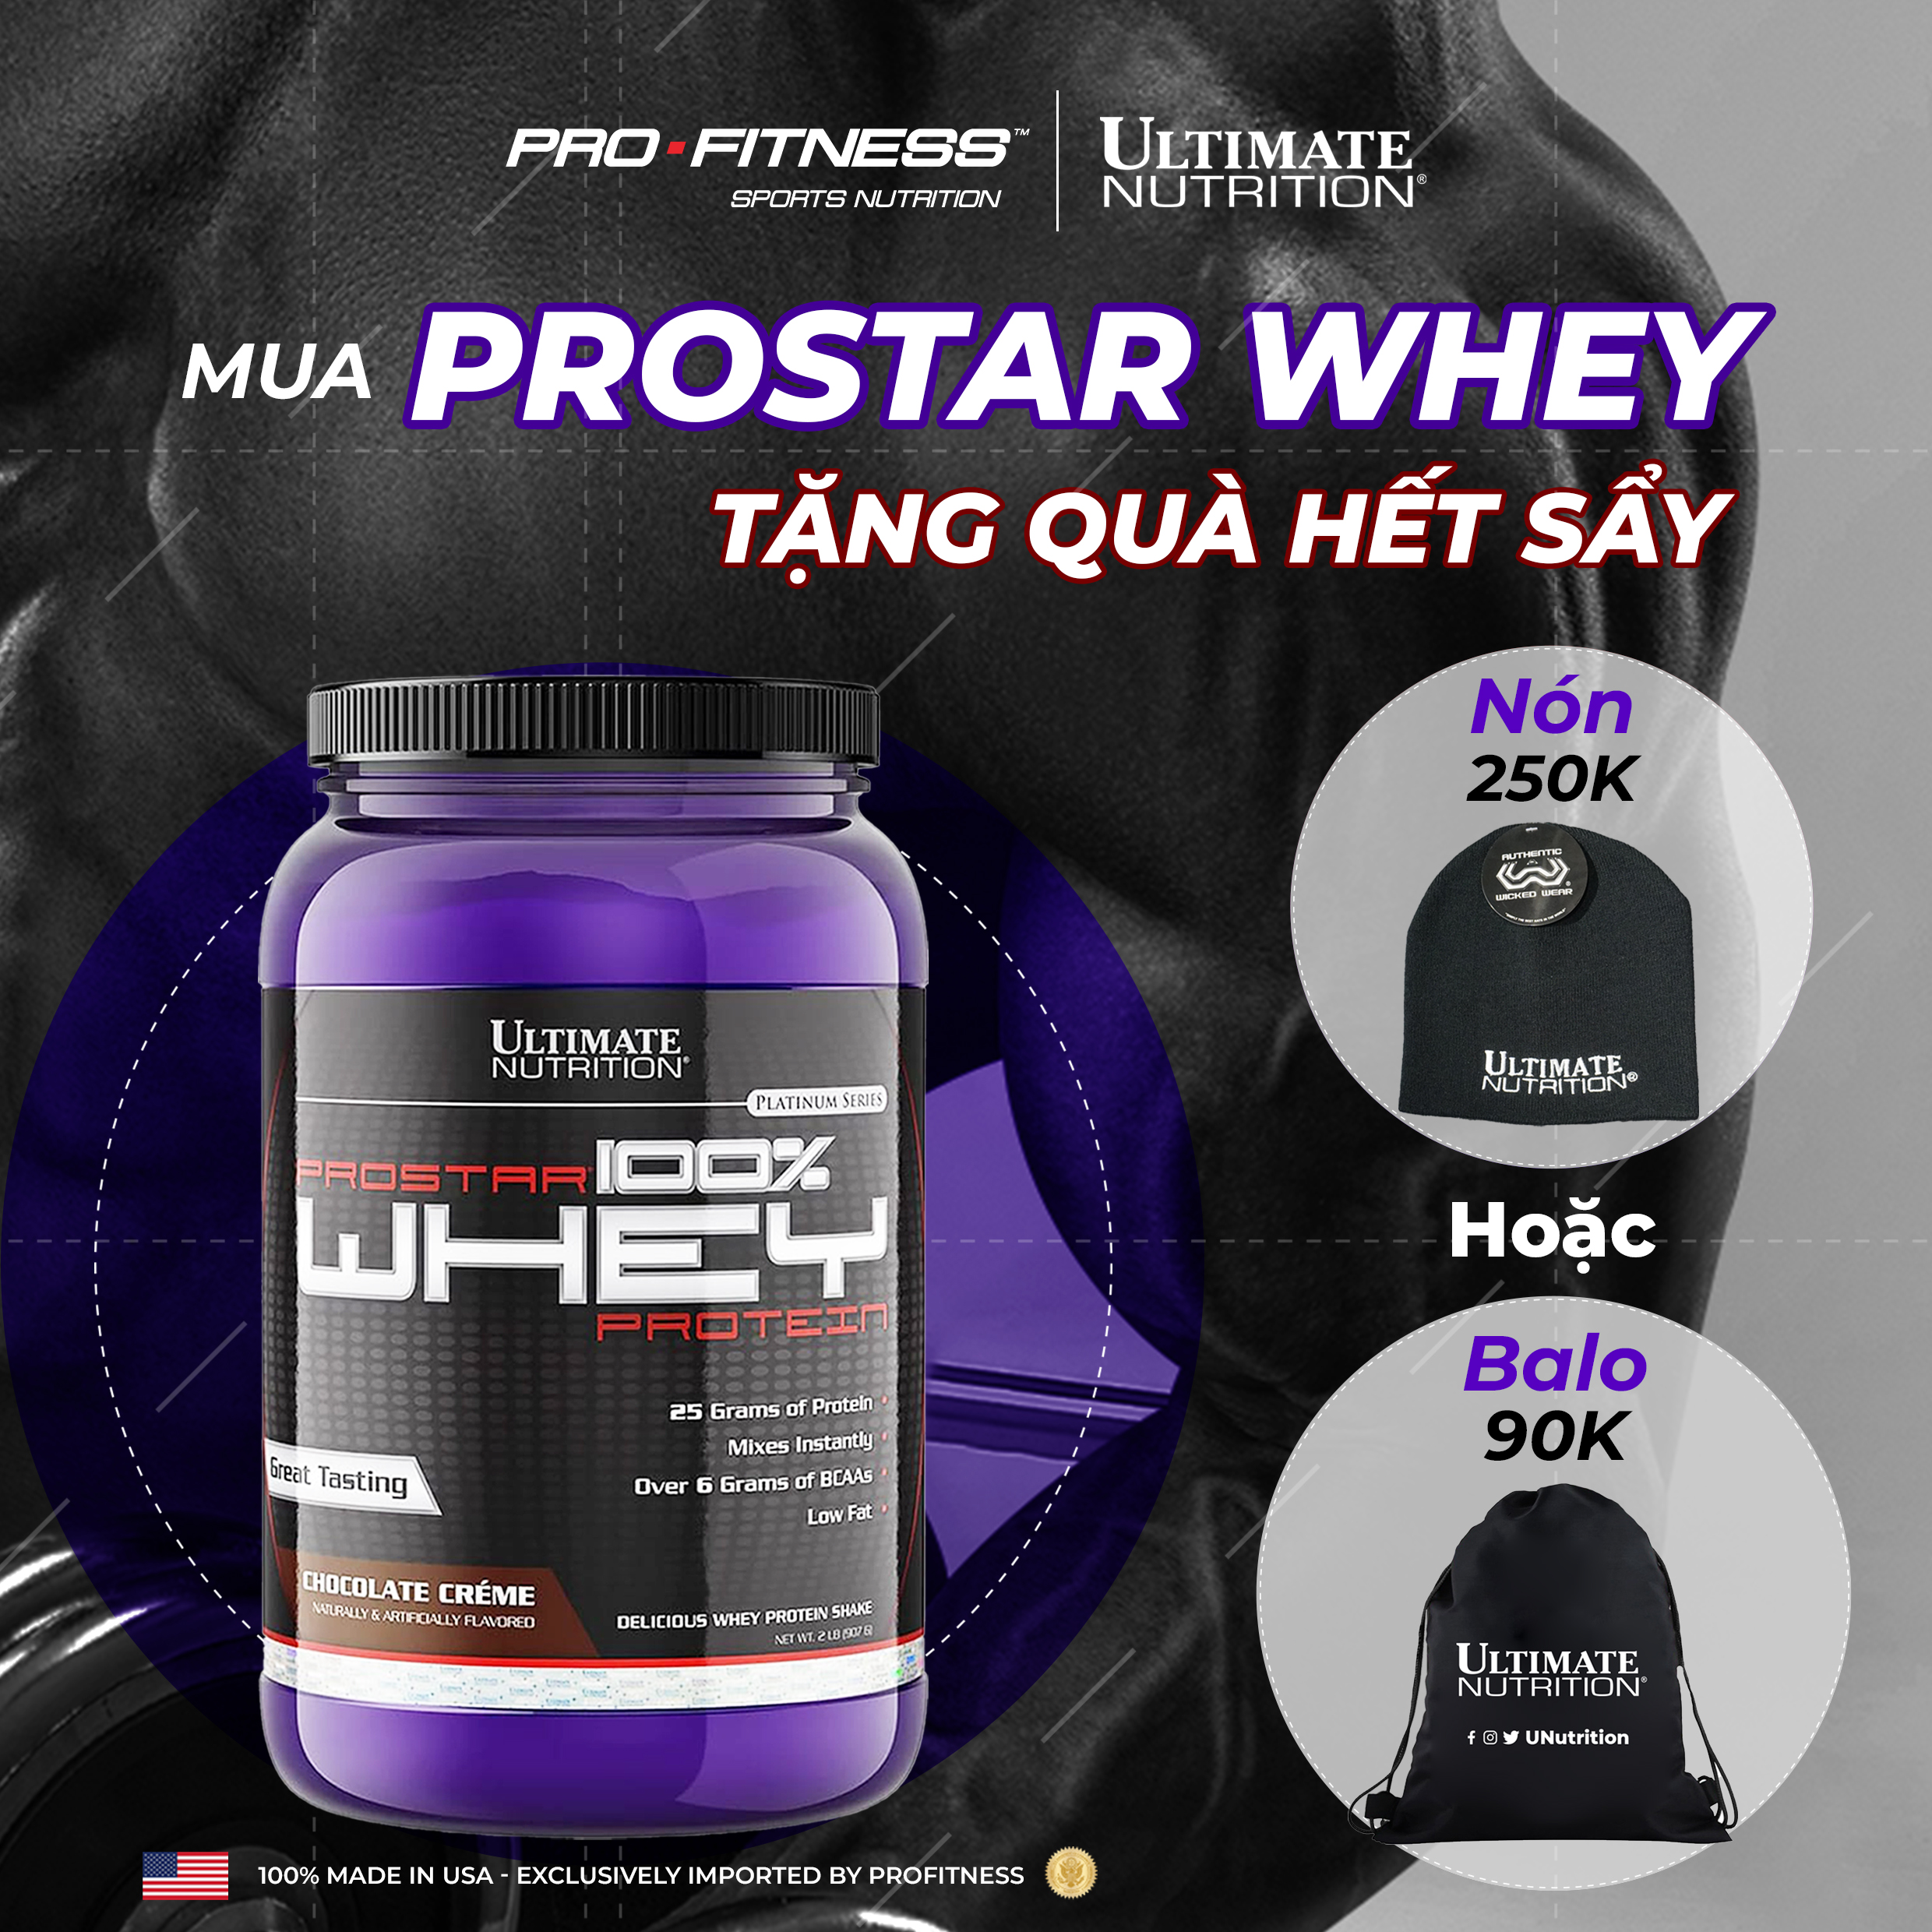 Whey Protein tăng cơ giảm mỡ Prostar 100 Ultimate Nutrition - Whey Isolate cao cấp hấp thụ protein Hũ 907g - Vị Chocolate